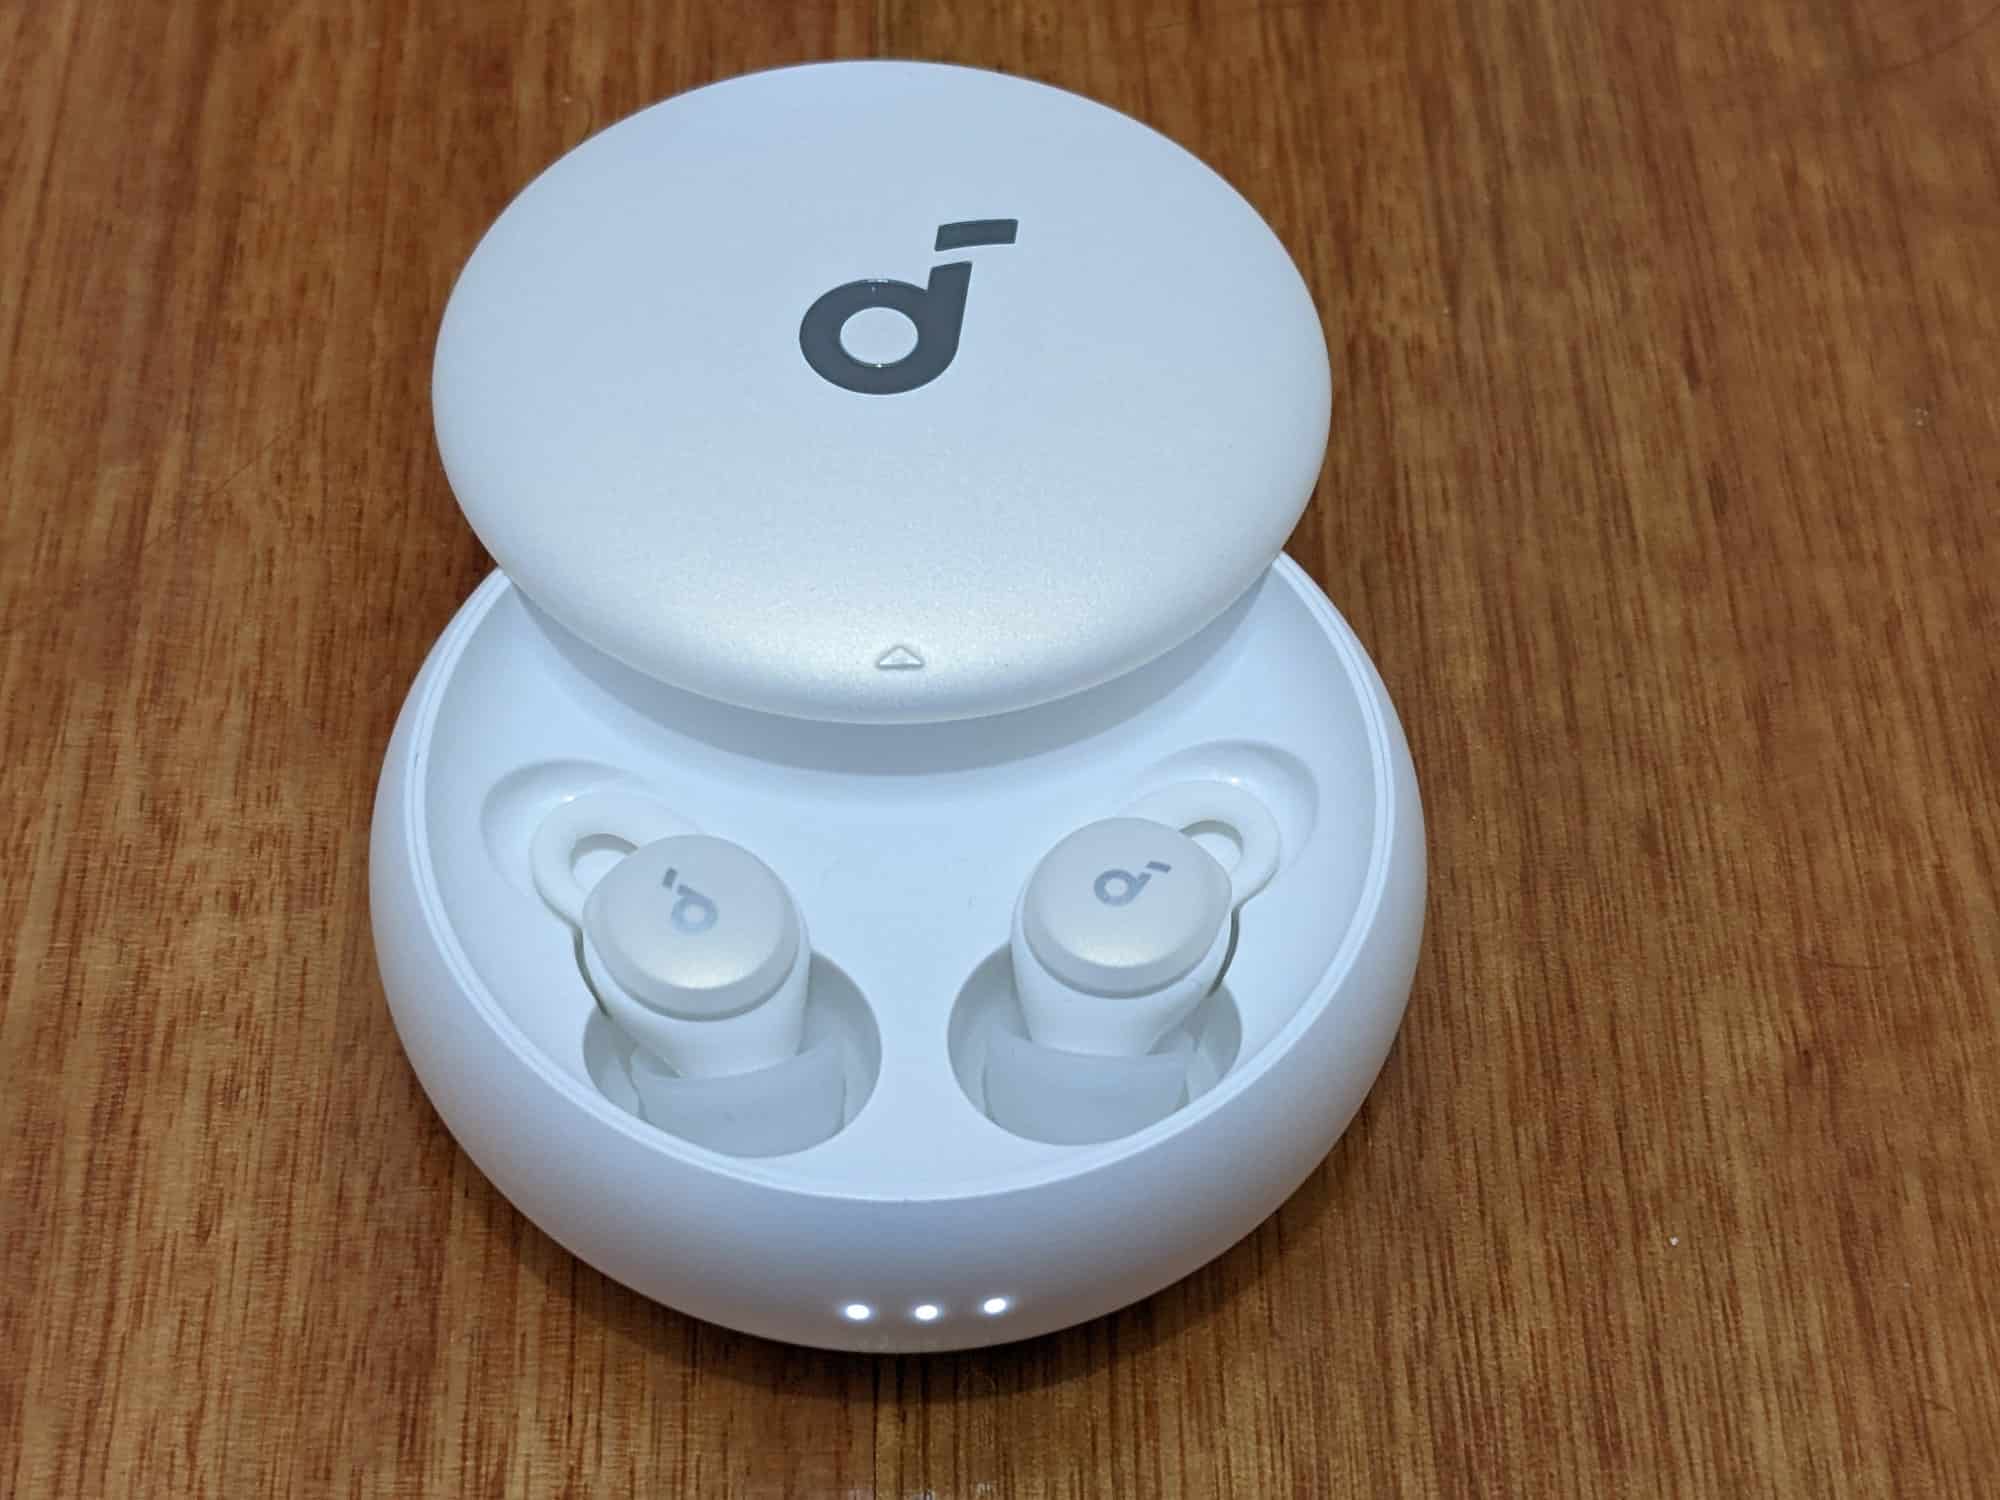 Round white Soundcore Sleep A10 earbuds case on a wooden table, with both earbuds inside the case and the charging lights on the front illuminated